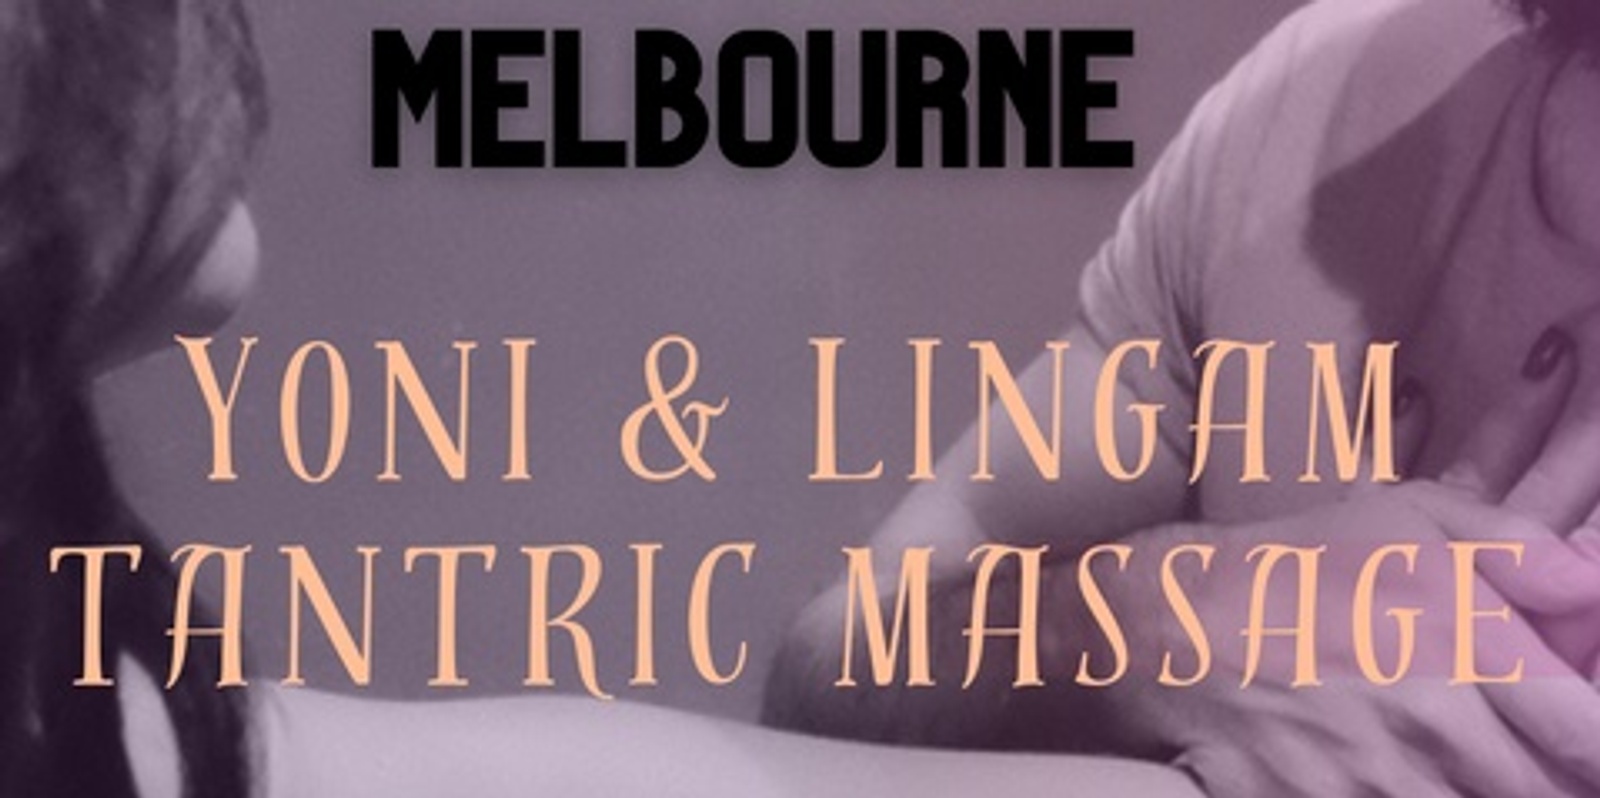 Banner image for A- Yoni and Lingam Tantric Massage - Melbourne